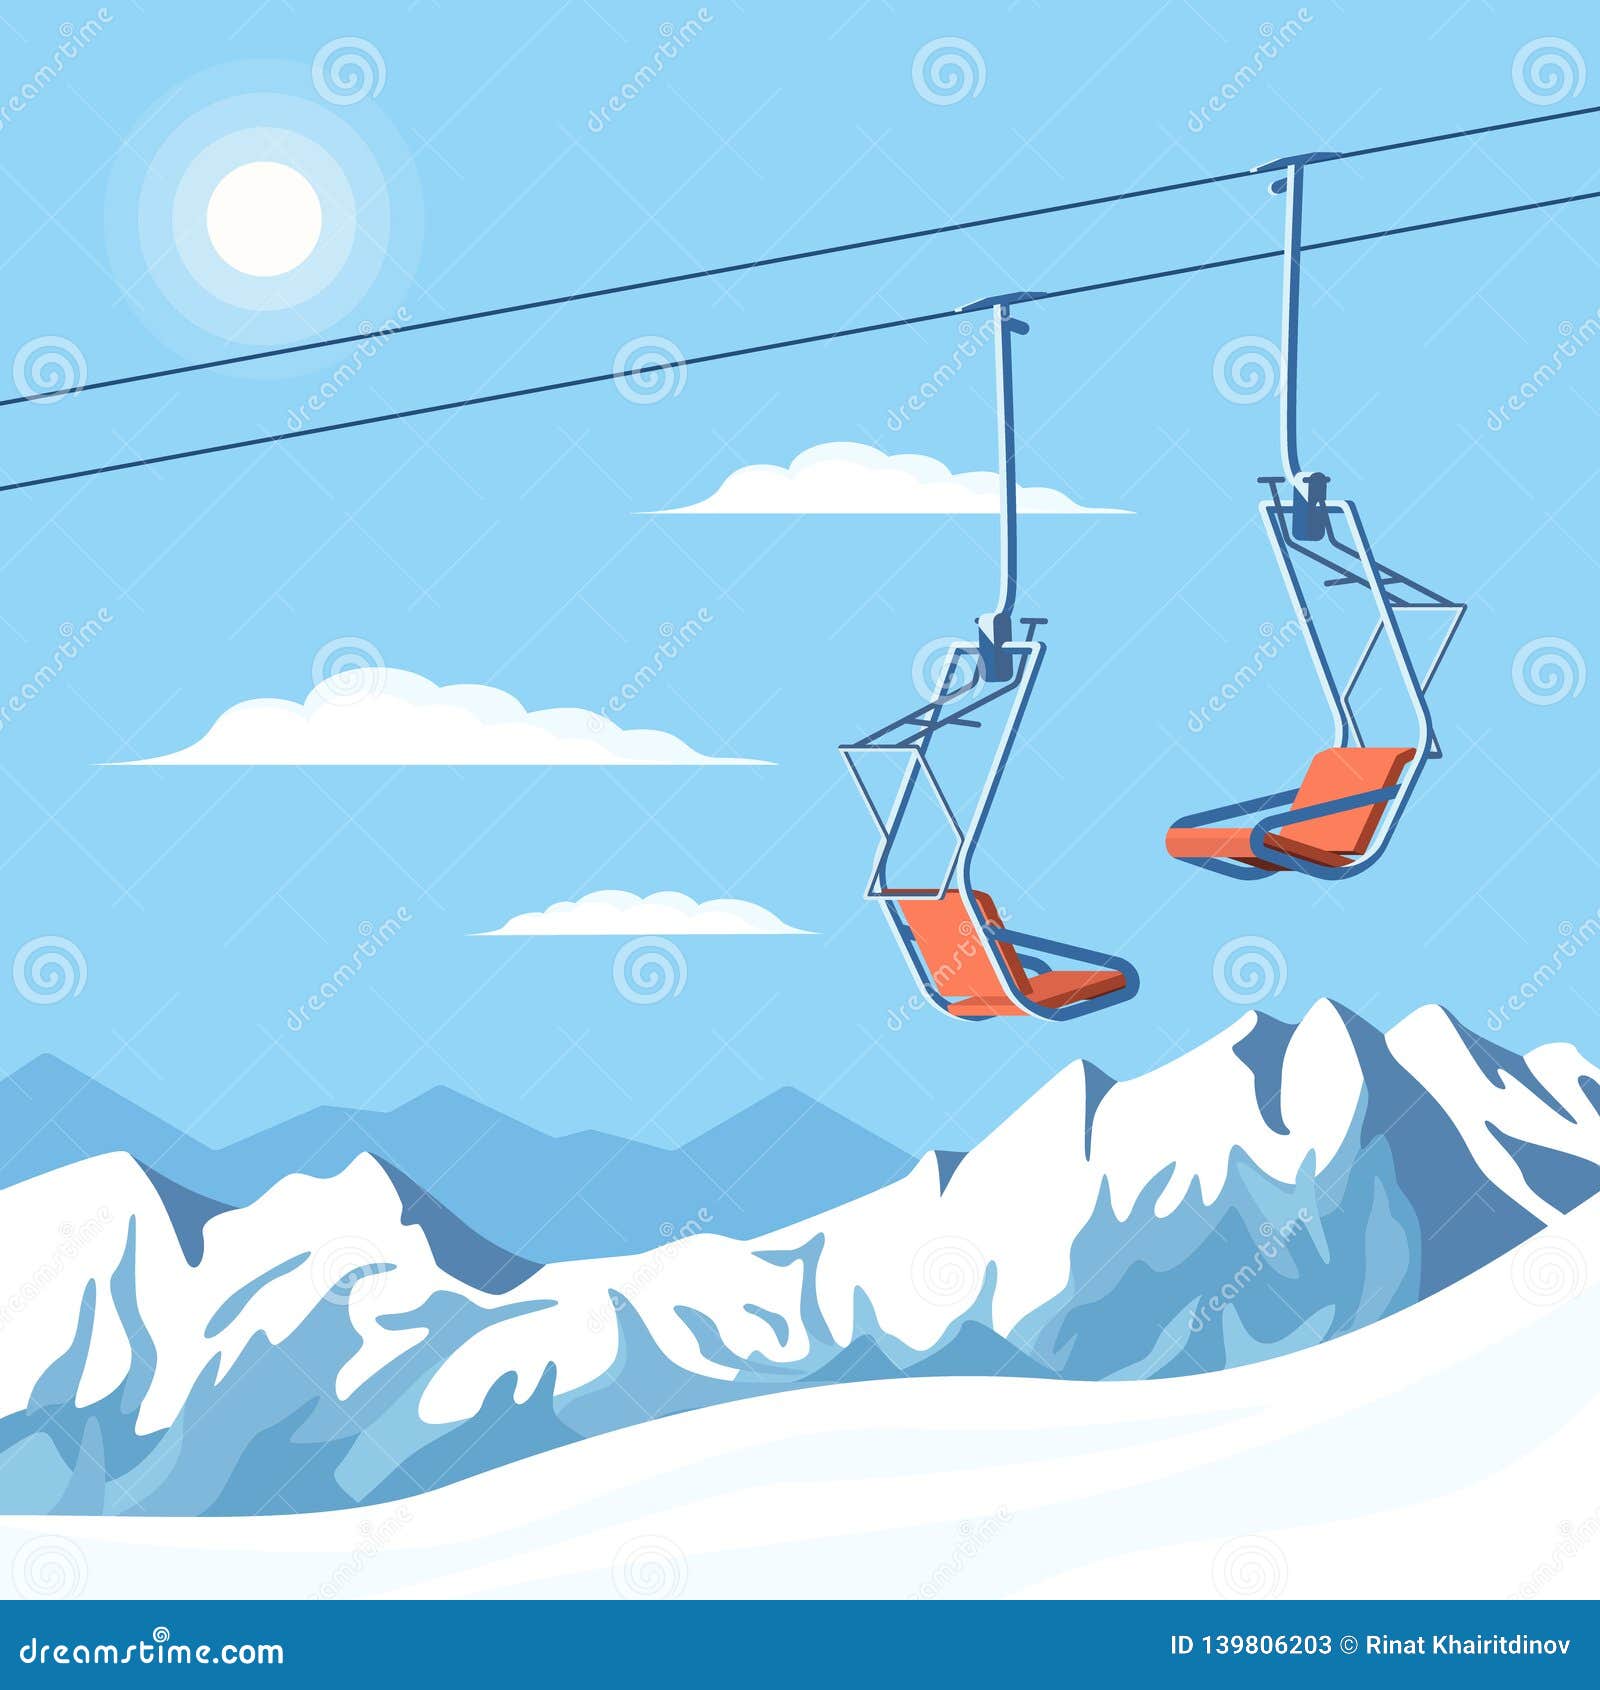 chair ski lift for mountain skiers and snowboarders moves in the air on a rope on the background of winter snow capped mountains